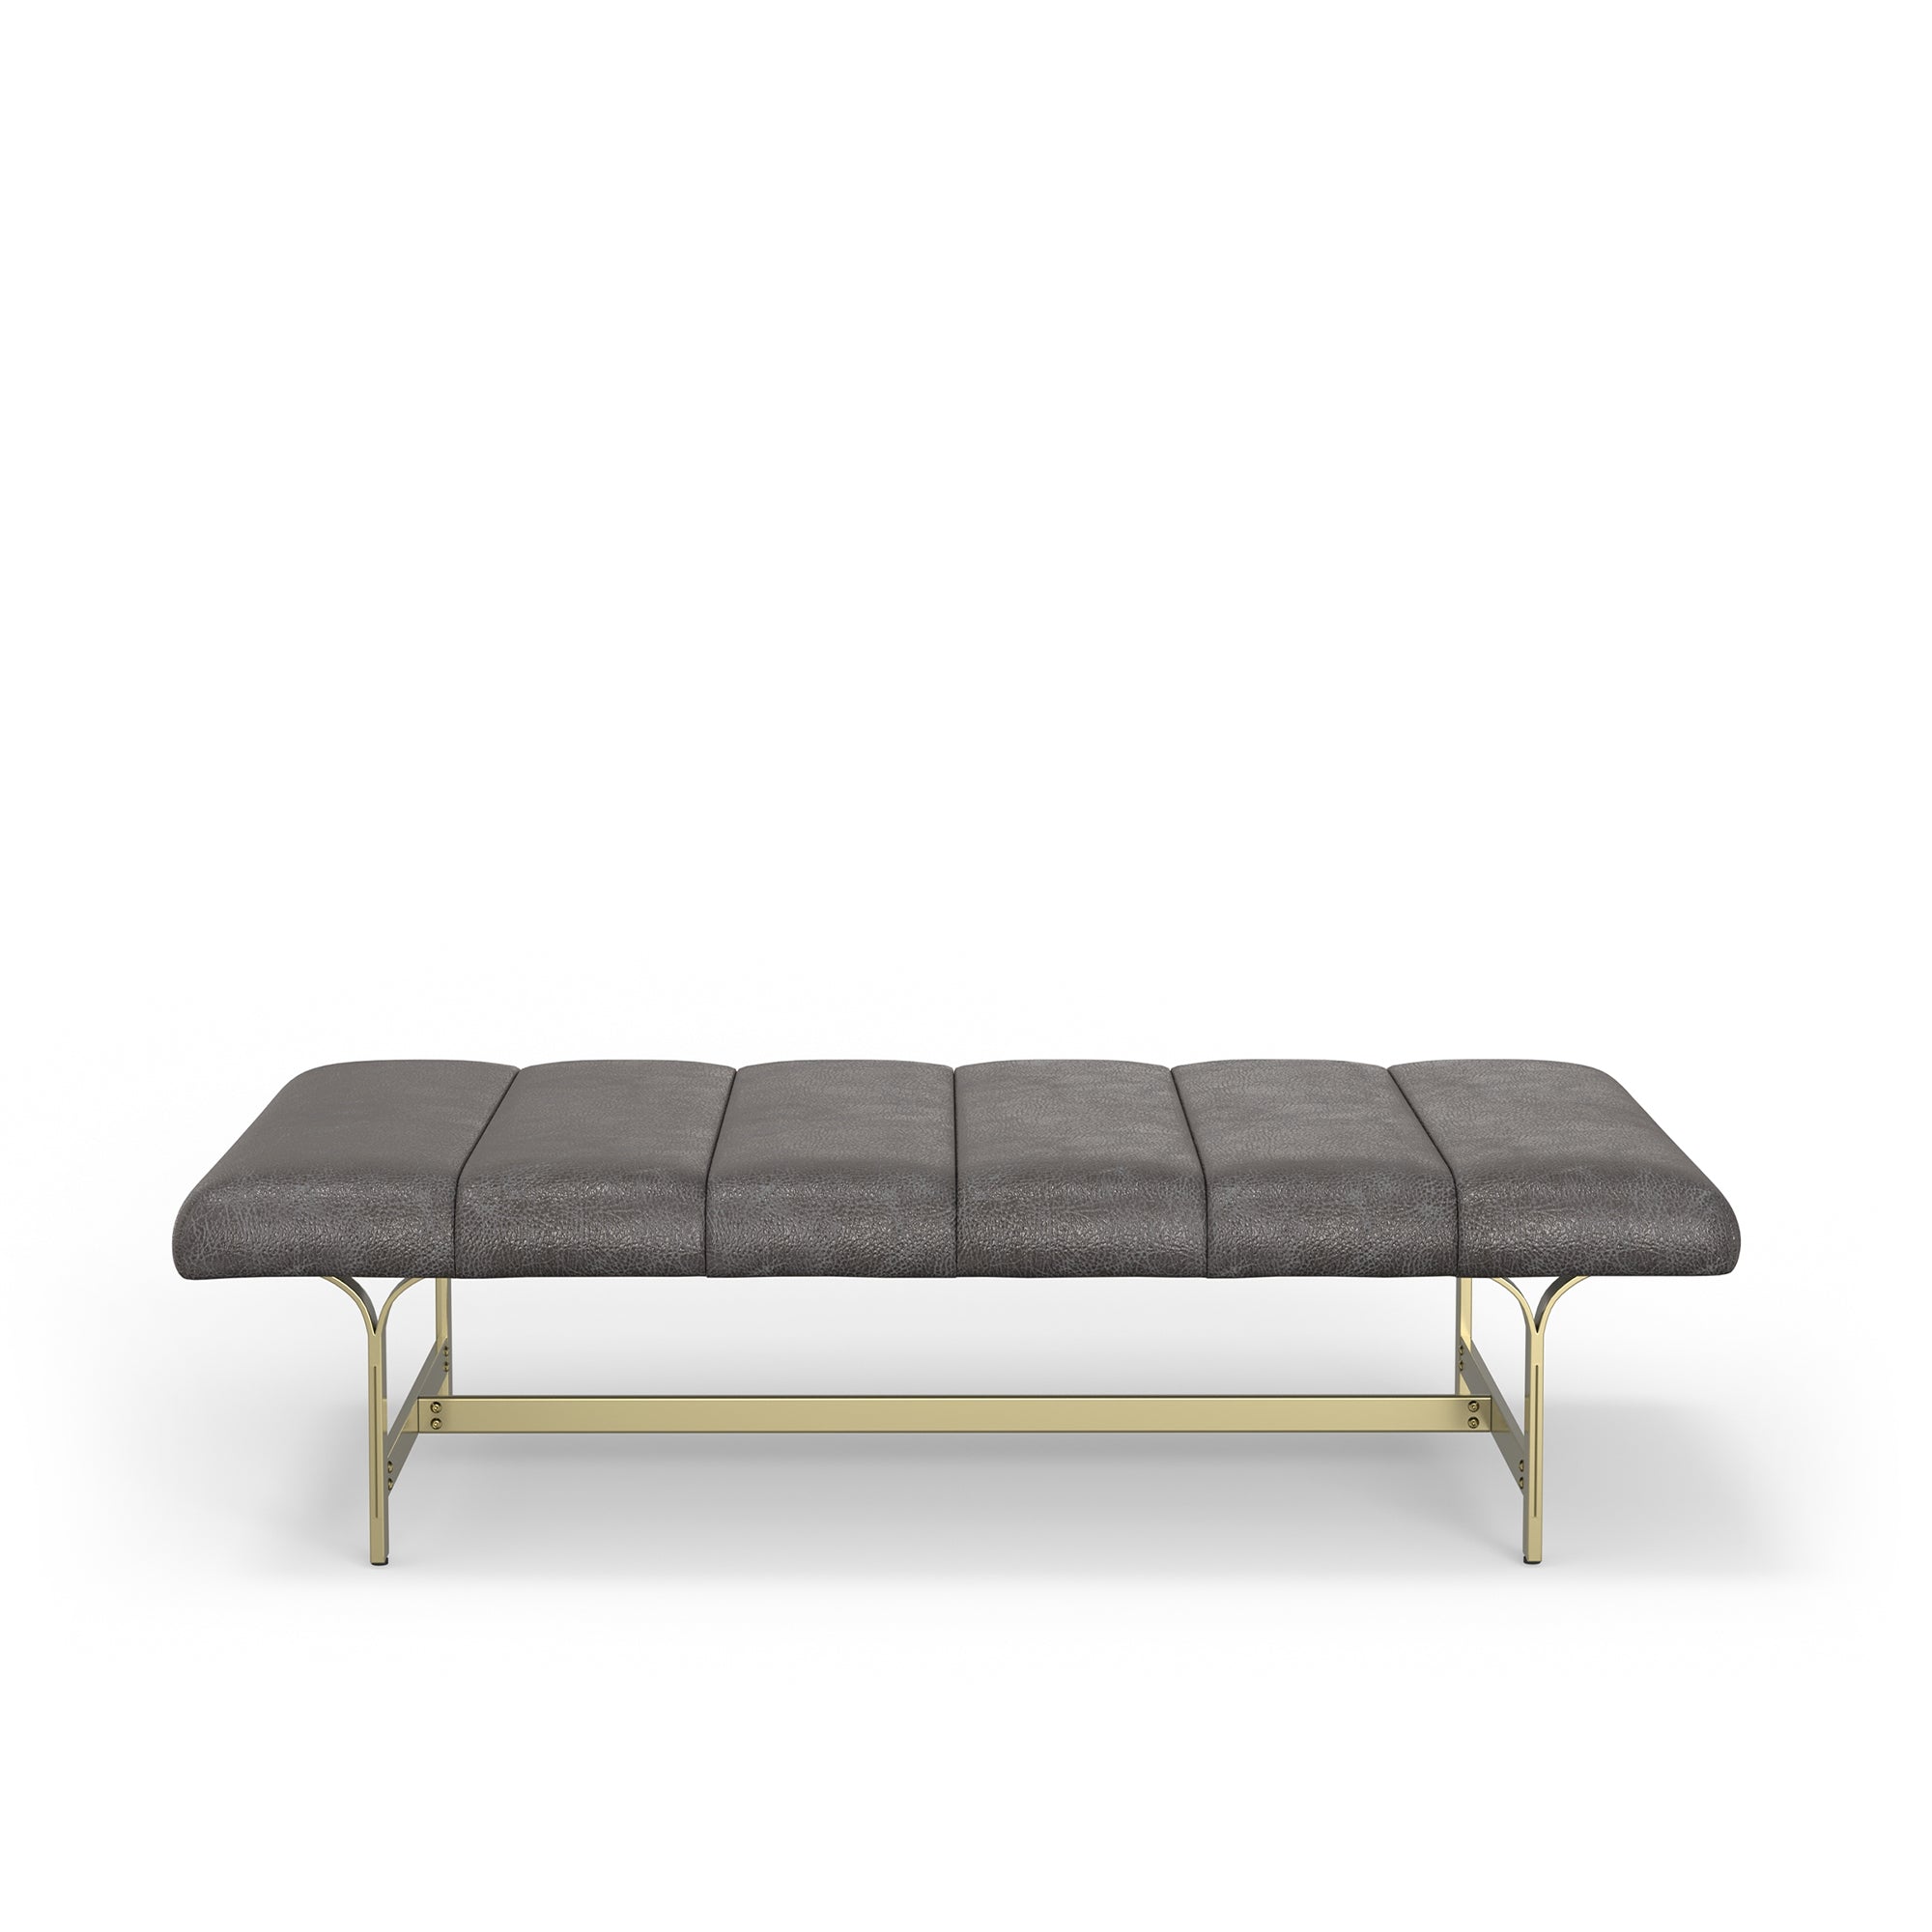 Studio A Upholstered Leather Coffee Table with Metal Base